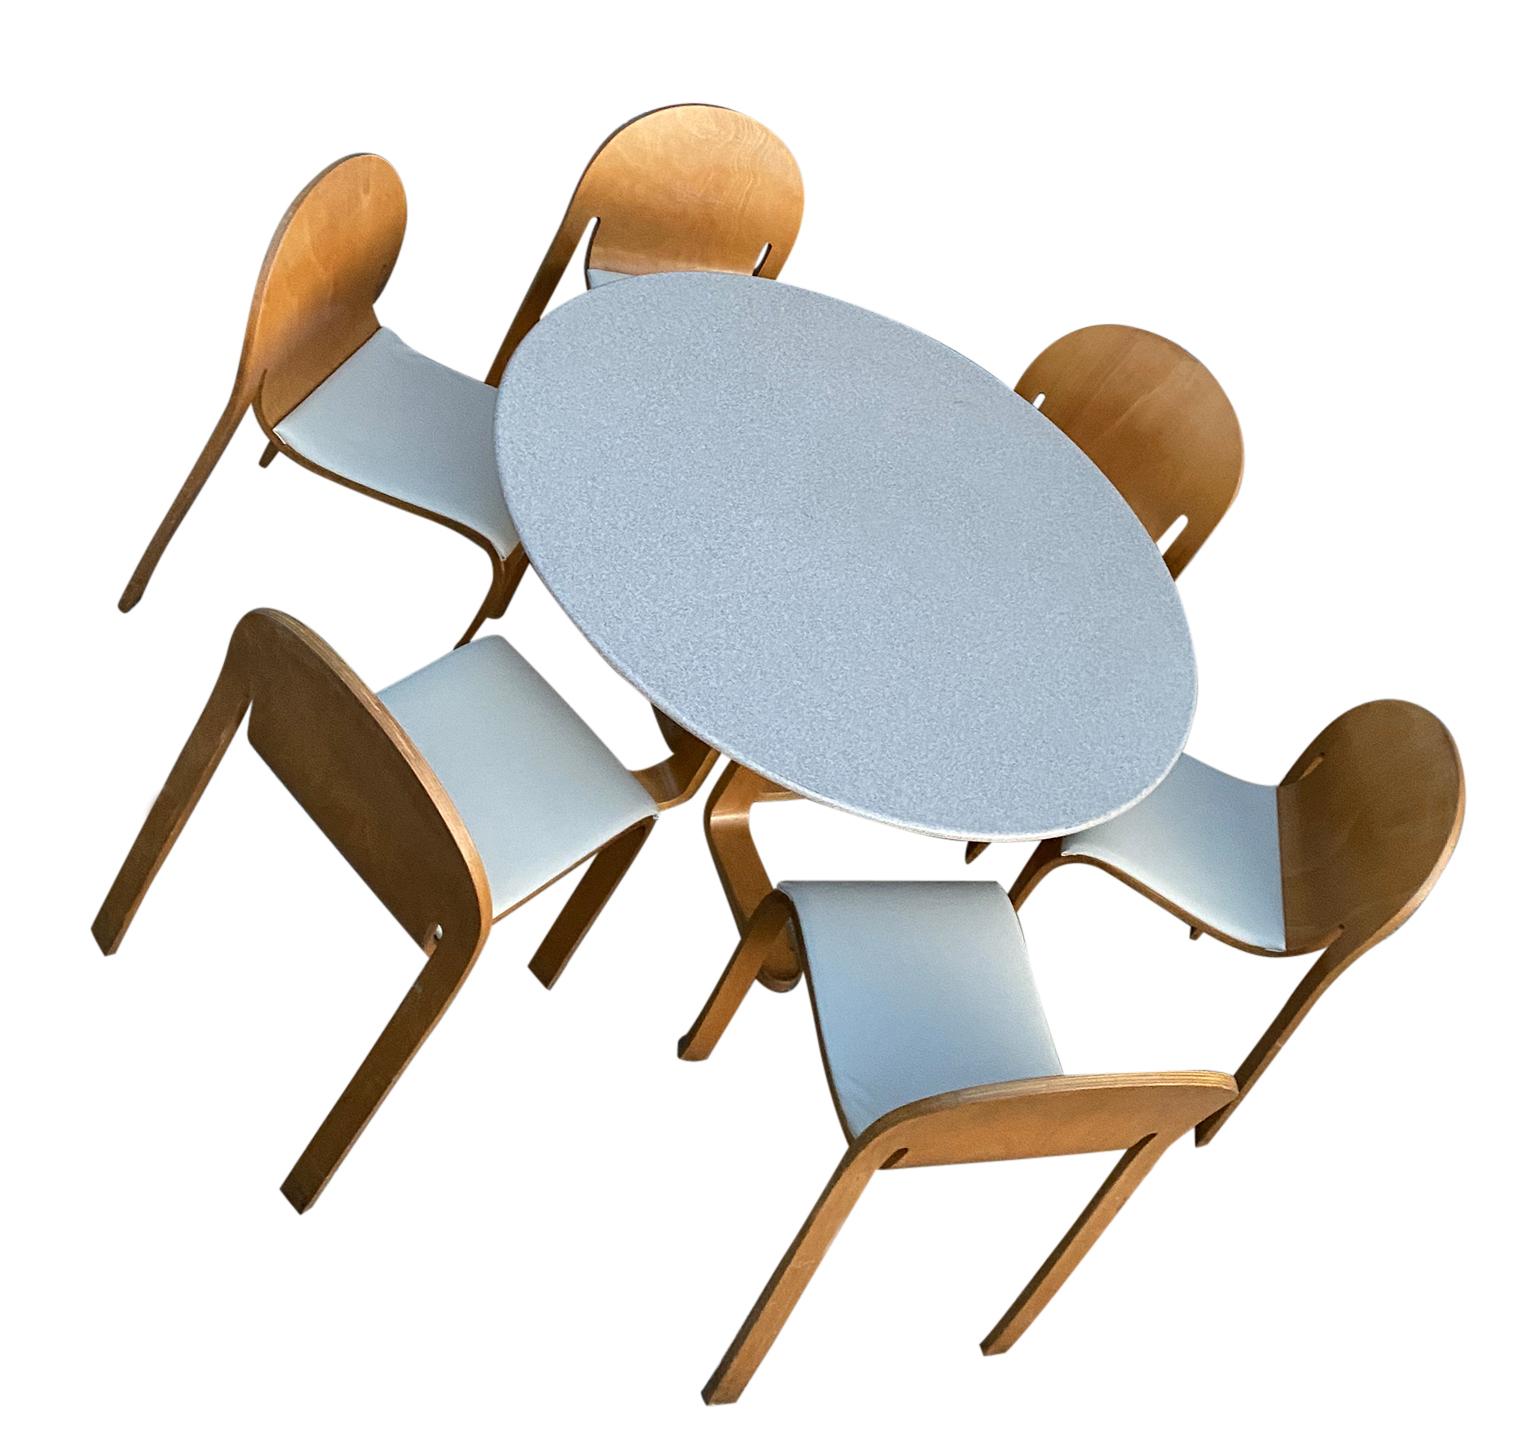 Rare Peter Danko Design Mid-Century Modern Dining Table '6' Chairs Bent Wood In Good Condition In BROOKLYN, NY